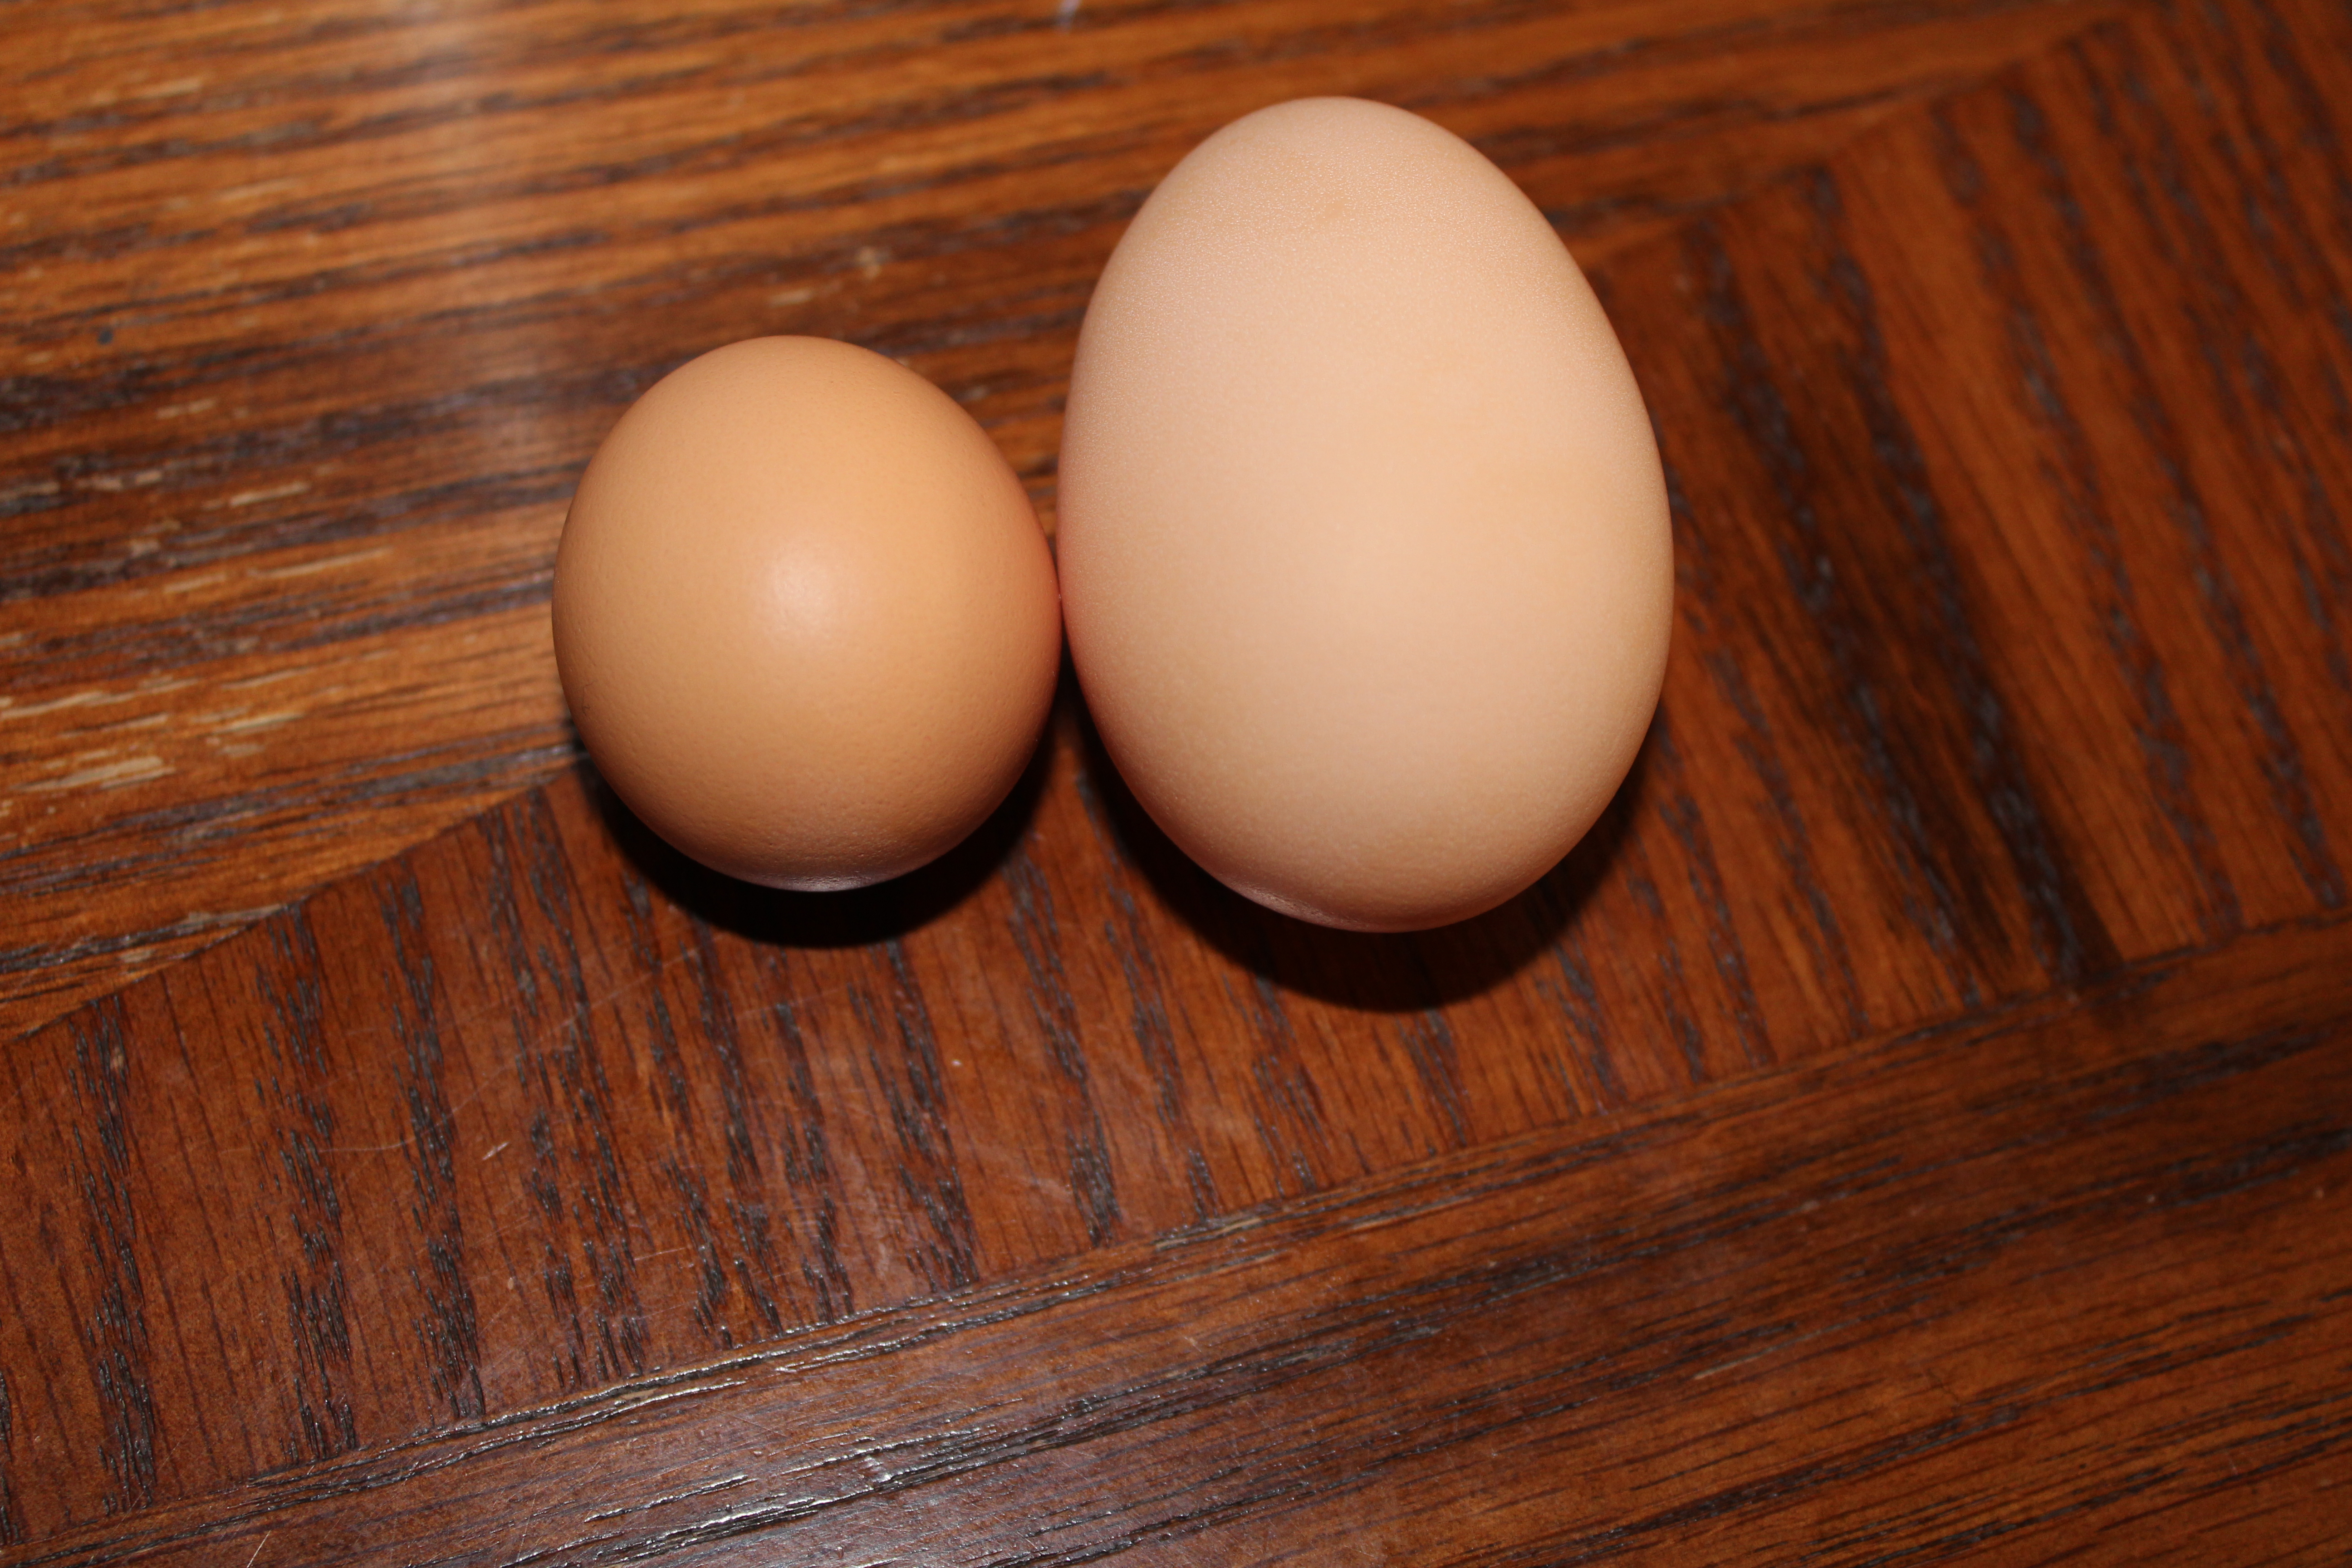 https://www.backyardchickens.com/gallery/what-our-pullet-egg-looked-like-then-a-double-yolker-from-our-jersey-giant-she-was-laying-one-double-yolker-a-week-for-about-a-month-now-she-lays-regular-size-eggs-with-an-occasional-double-yolked-one.6938395/full